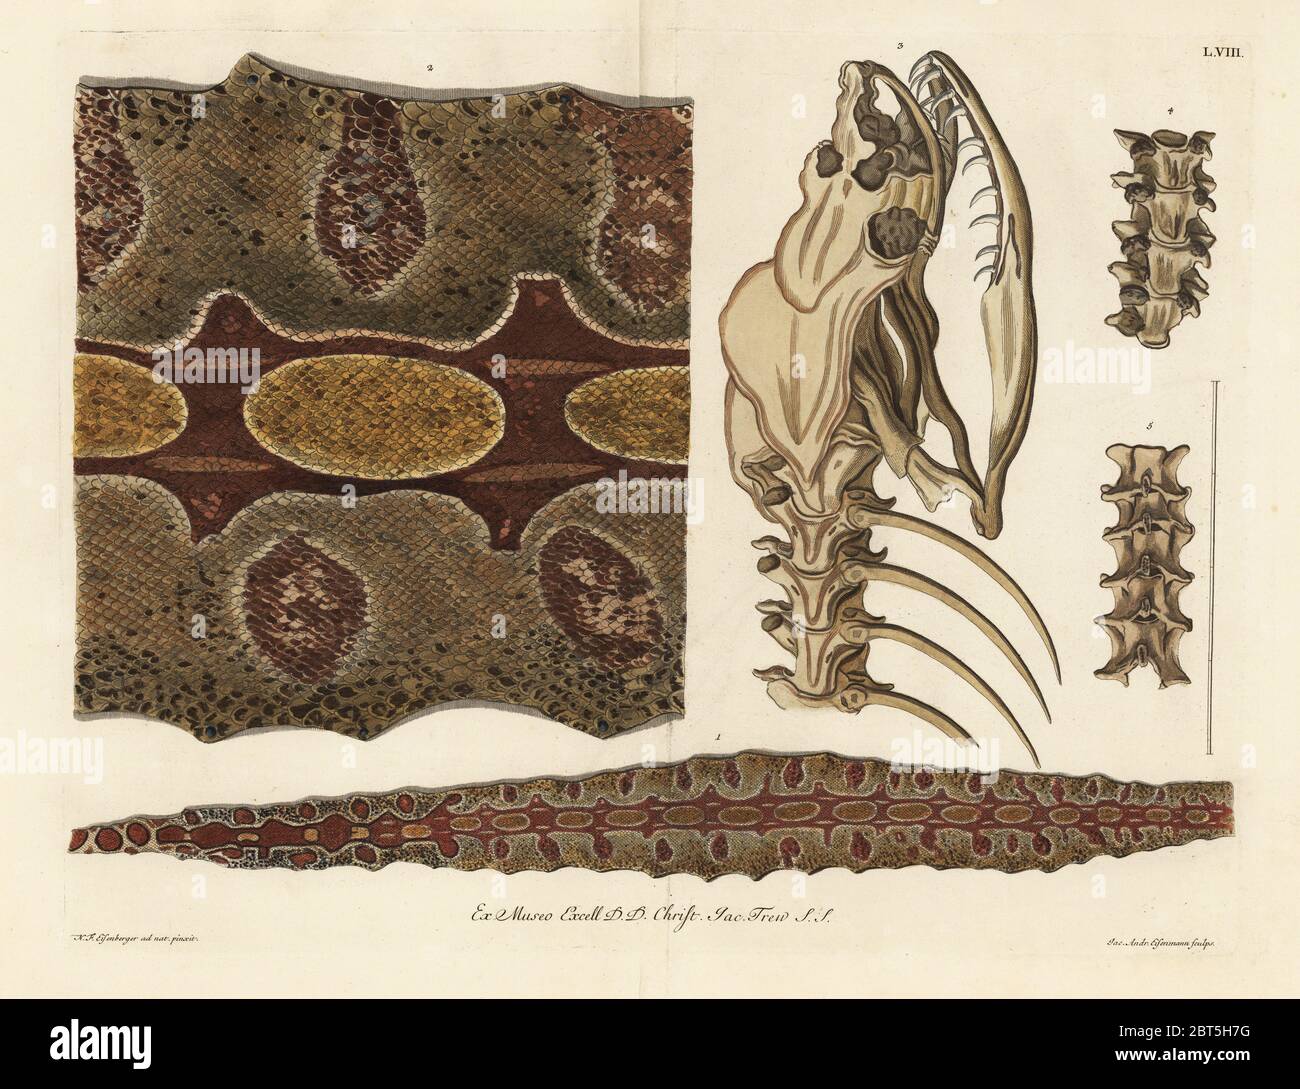 Red-tailed boa skin, skeleton and spine, Boa constrictor. (Le peau d'un Serpent de Ceilan, une piece en grand, le squelette, epine exterieure, epine interieure.) Handcoloured copperplate engraving by Jakob-Andreas Eisemann after an illustration after nature by Nicolaus Friedrich Eisenberger from Georg Wolfgang Knorr's Deliciae Naturae Selectae of Kabinet van Zeldzaamheden der Natuur, Blusse and Son, Nuremberg, 1771. Specimens from a Wunderkammer or Cabinet of Curiosities owned by Dr. Christoph Jacob Trew in Nuremberg. Stock Photo